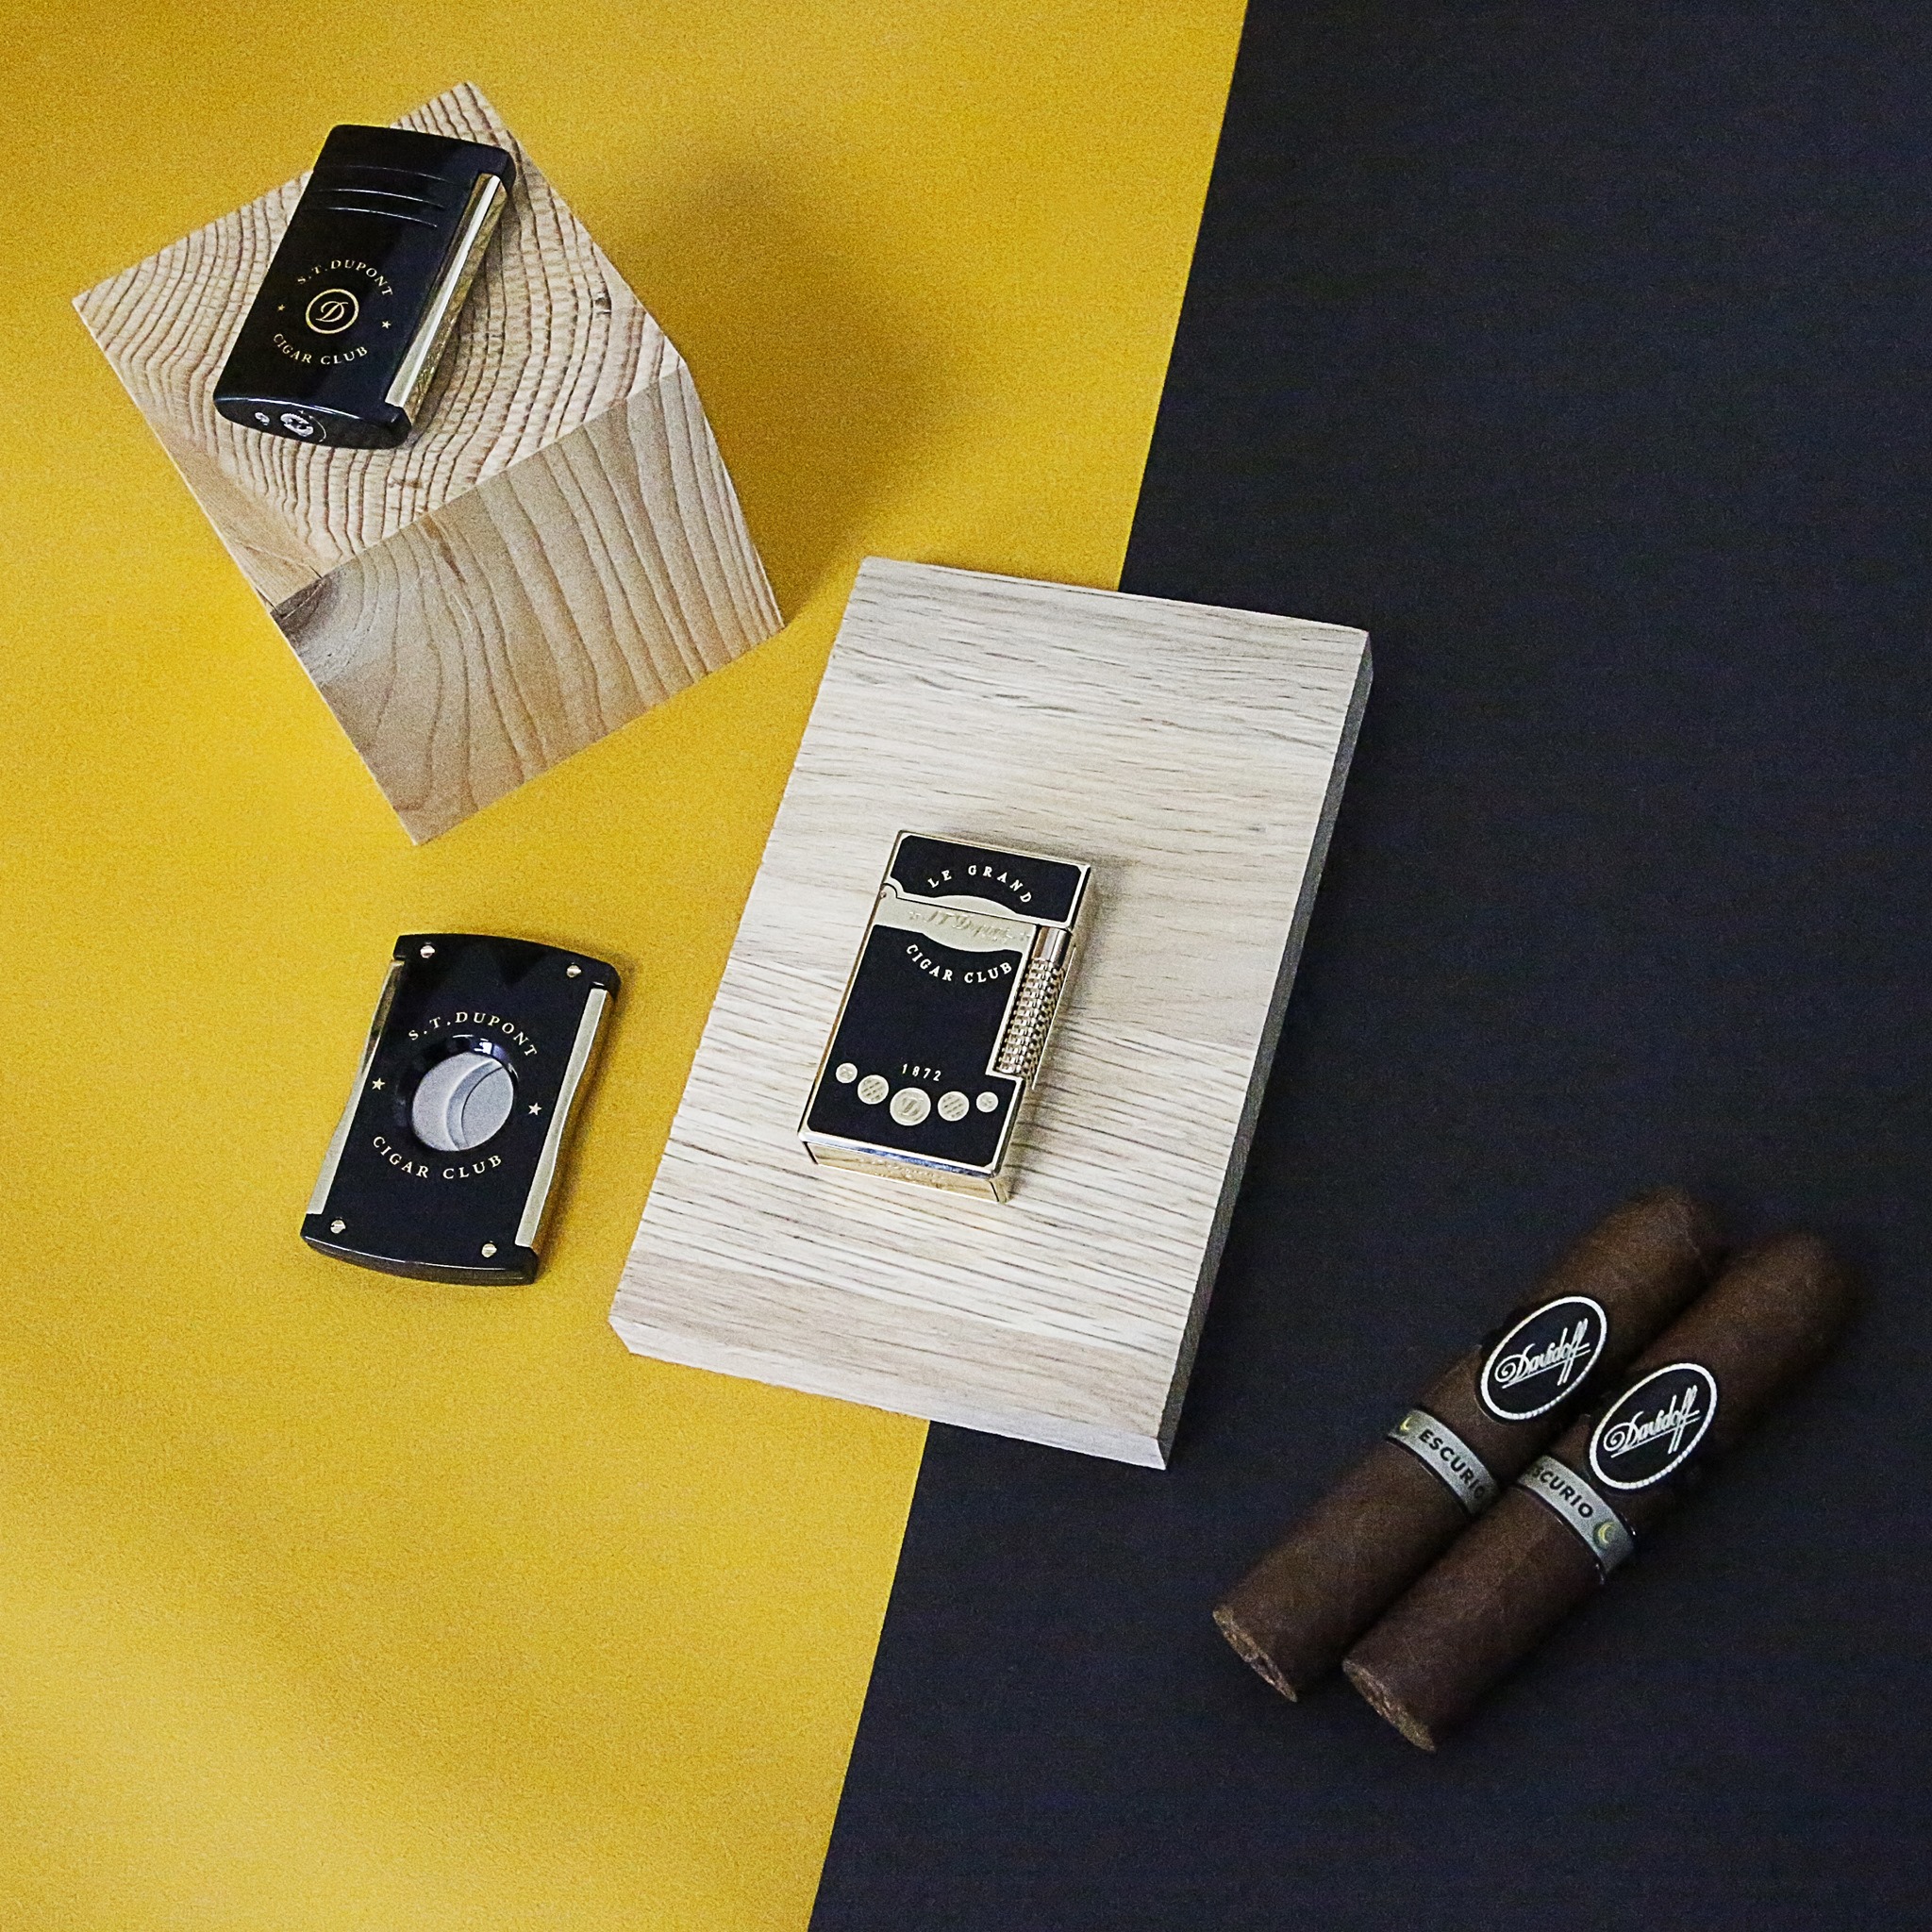 The long-awaited « S.T. Dupont Cigar Club » collection is now available! An entire range of luxury accessories dedicated to the art of smoking :